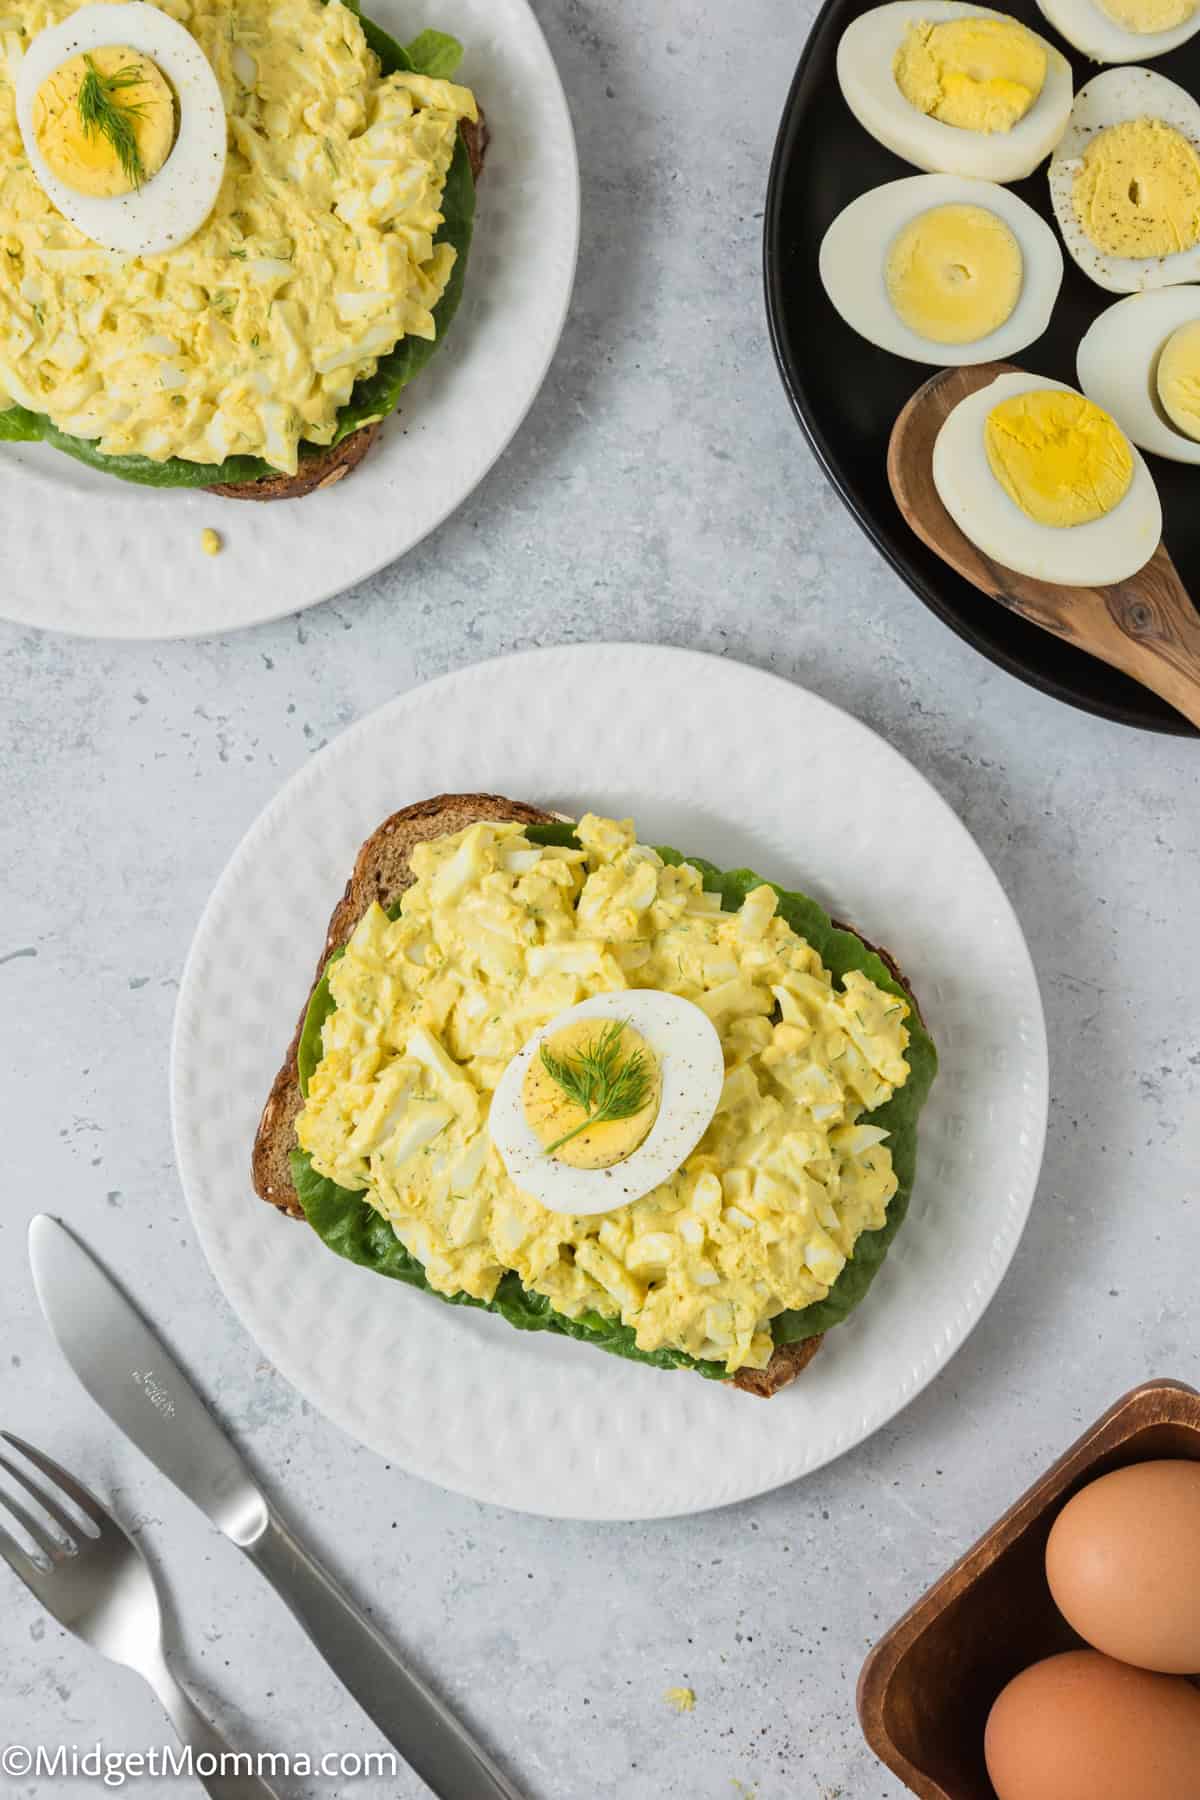 Egg salad served on whole grain bread, topped with egg slices, accompanied by a spoonful of eggs and a carton of brown eggs on a light gray surface.